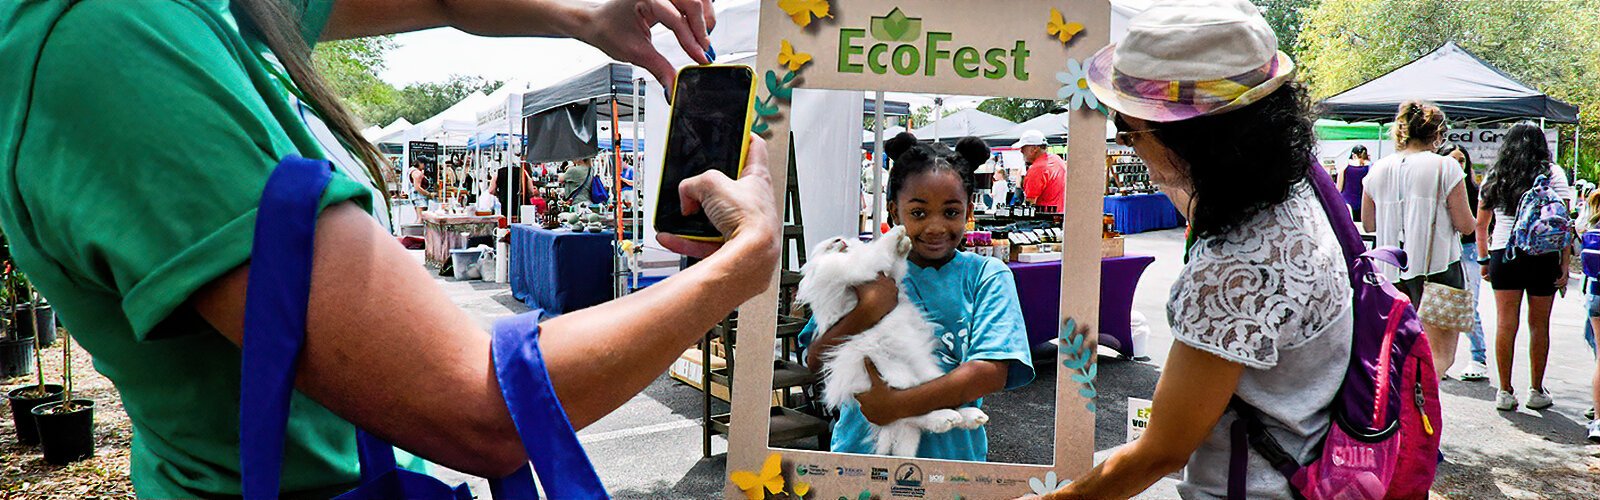 Volunteers use a frame to take a picture of a young girl with a pet rabbit at the 13th annual EcoFest, which celebrated Earth Day on April 22nd at the Museum of Science and Industry (MOSI) in Tampa.